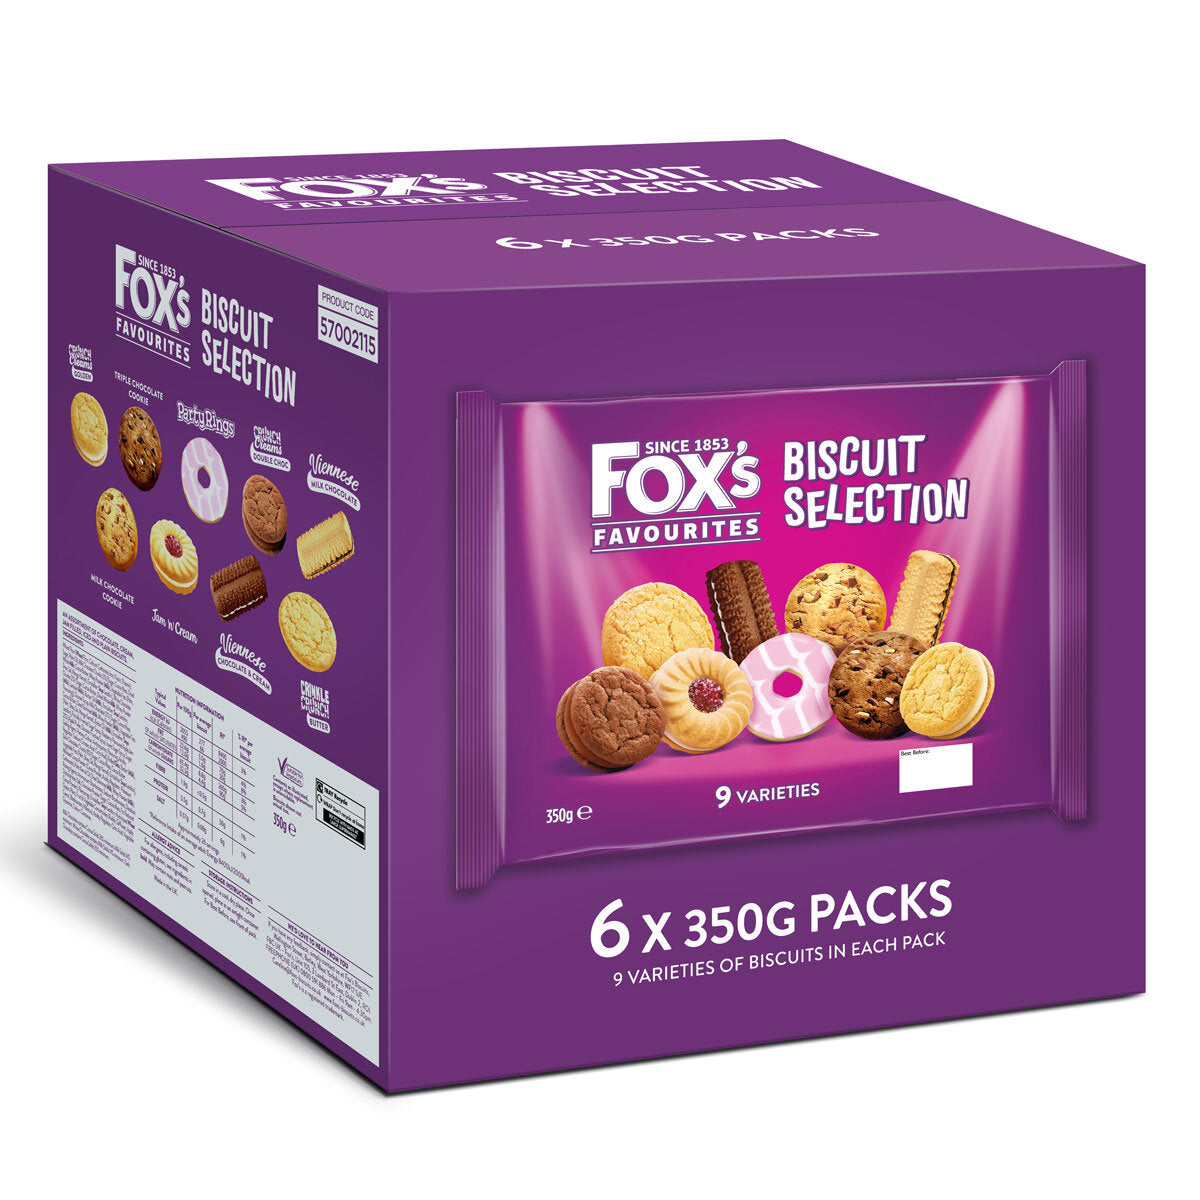 Fox's Favourites Biscuit Selection - 350g Pack of 6